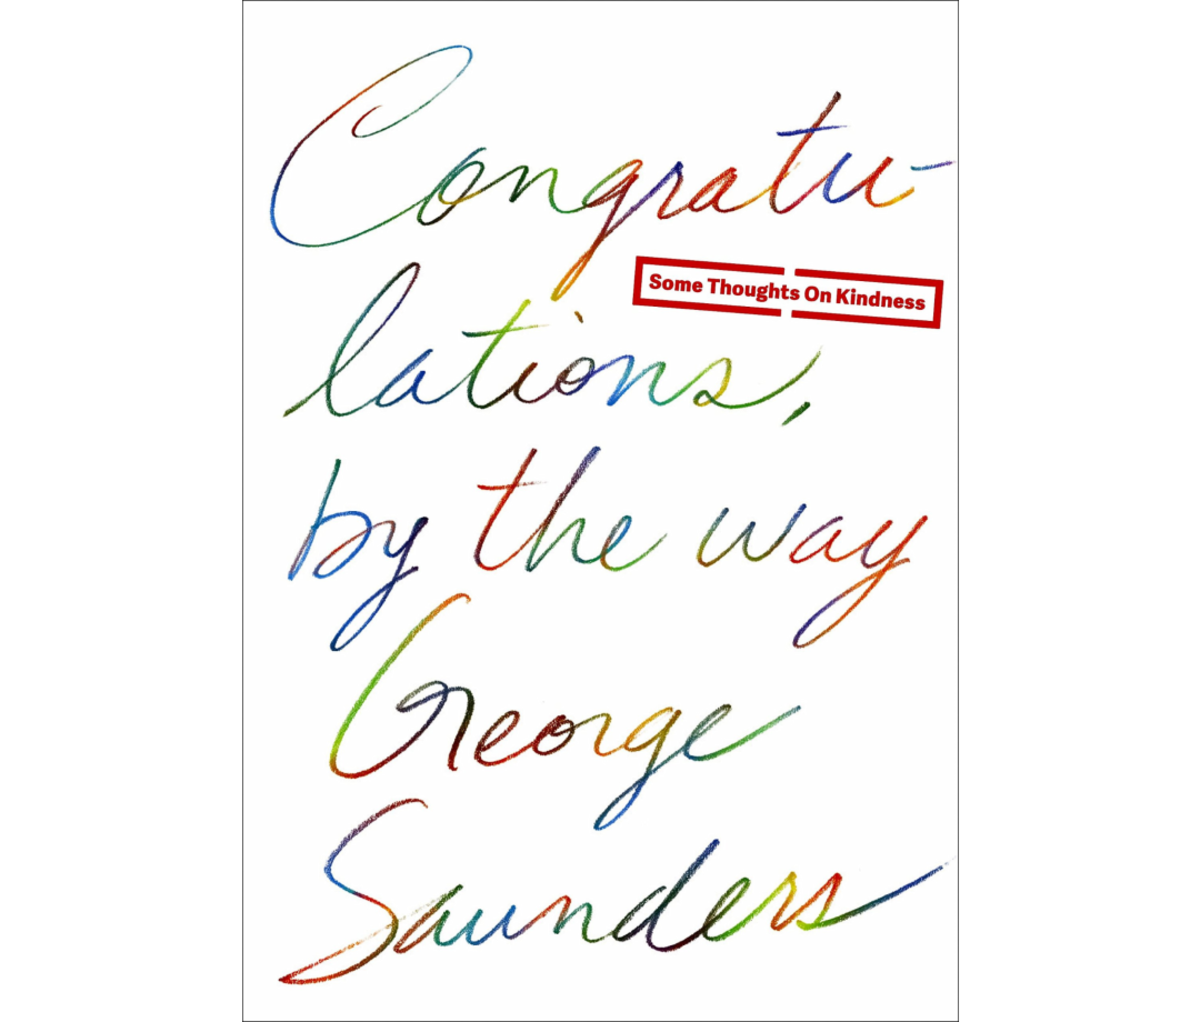 Congratulations, by the way- Some Thoughts on Kindness by George Saunders